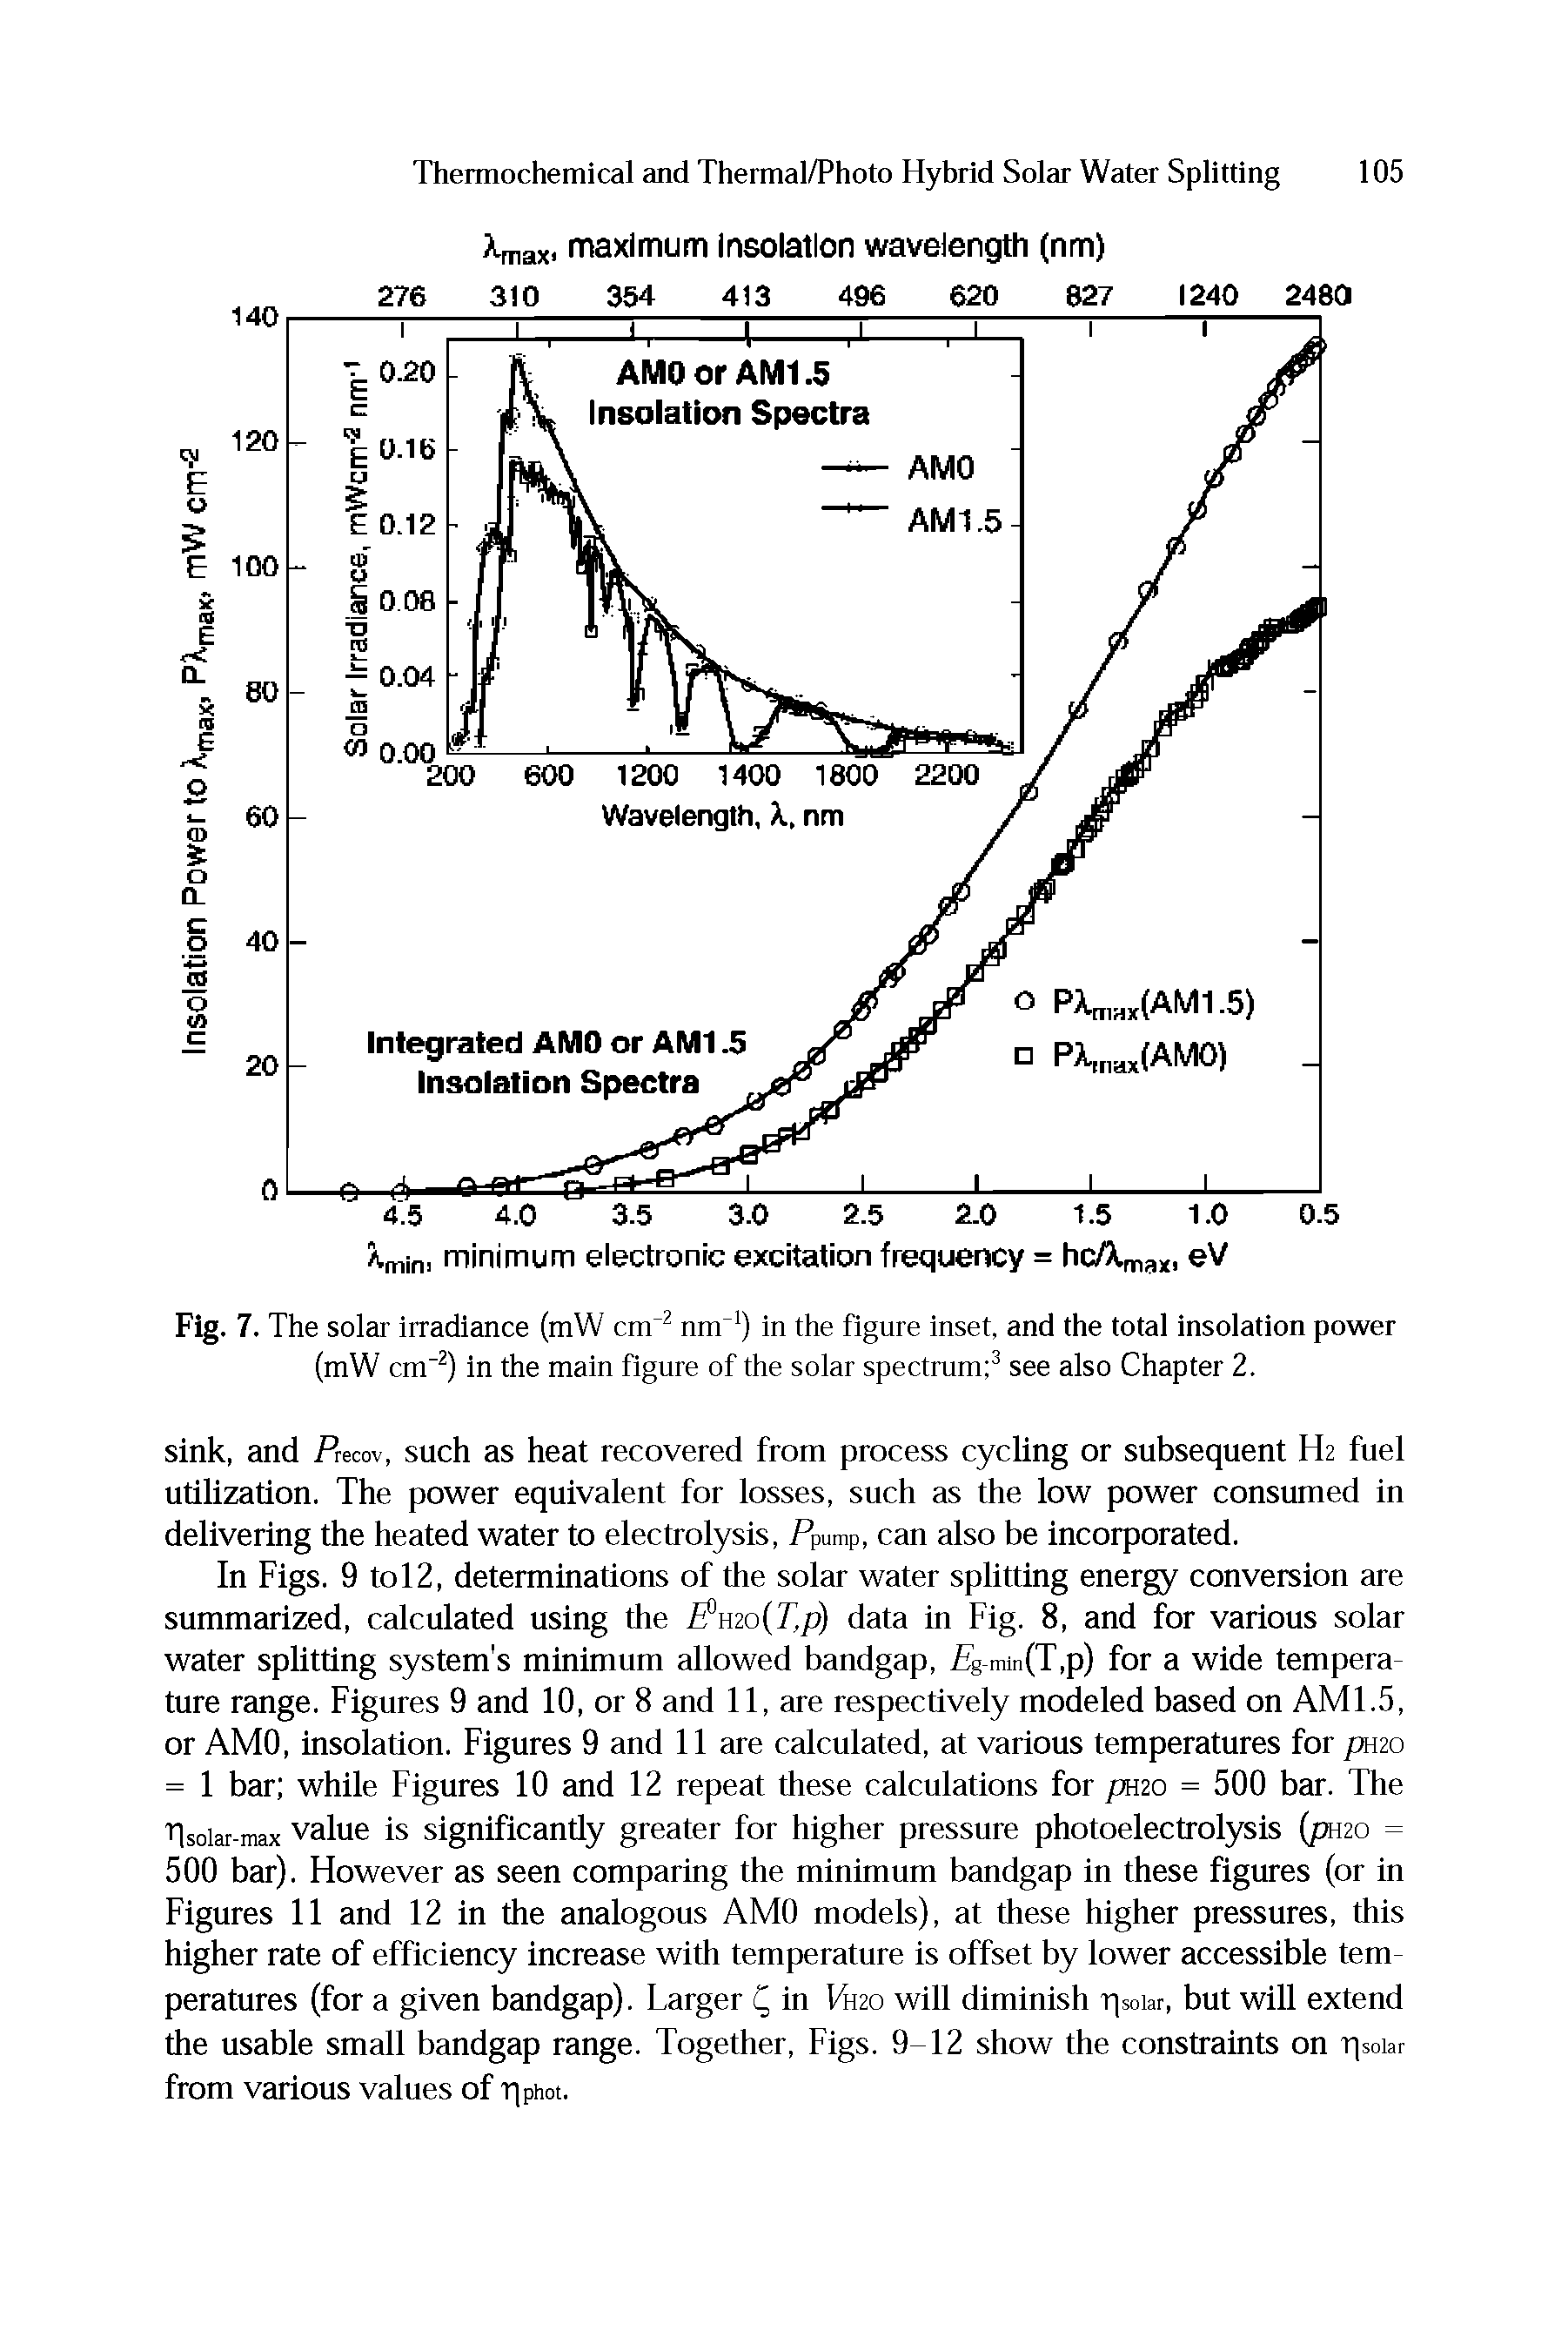 Fig. 7. The solar irradiance (mW cm 2 nm ) in the figure inset, and the total insolation power (mW cm-2) in the main figure of the solar spectrum 3 see also Chapter 2.